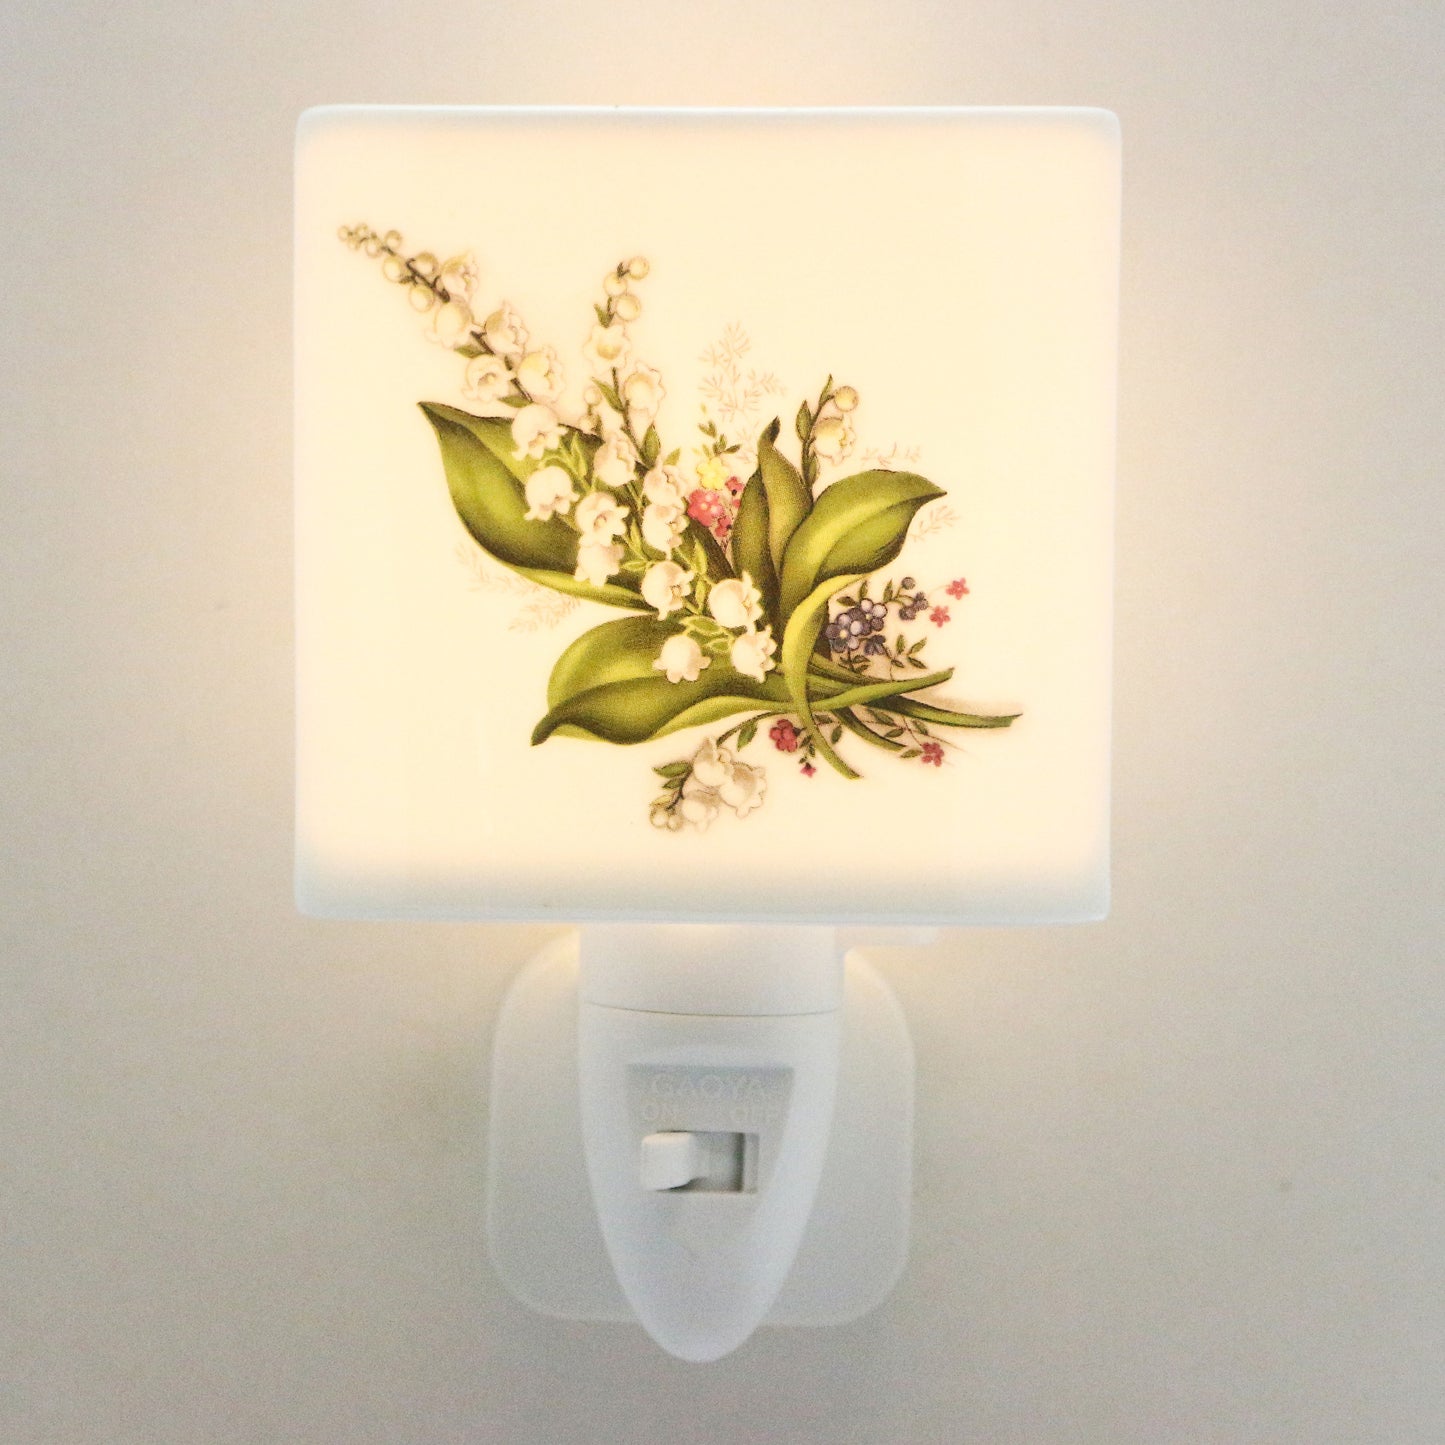 LED Ceramic Night Light - Lily of the Valley Design